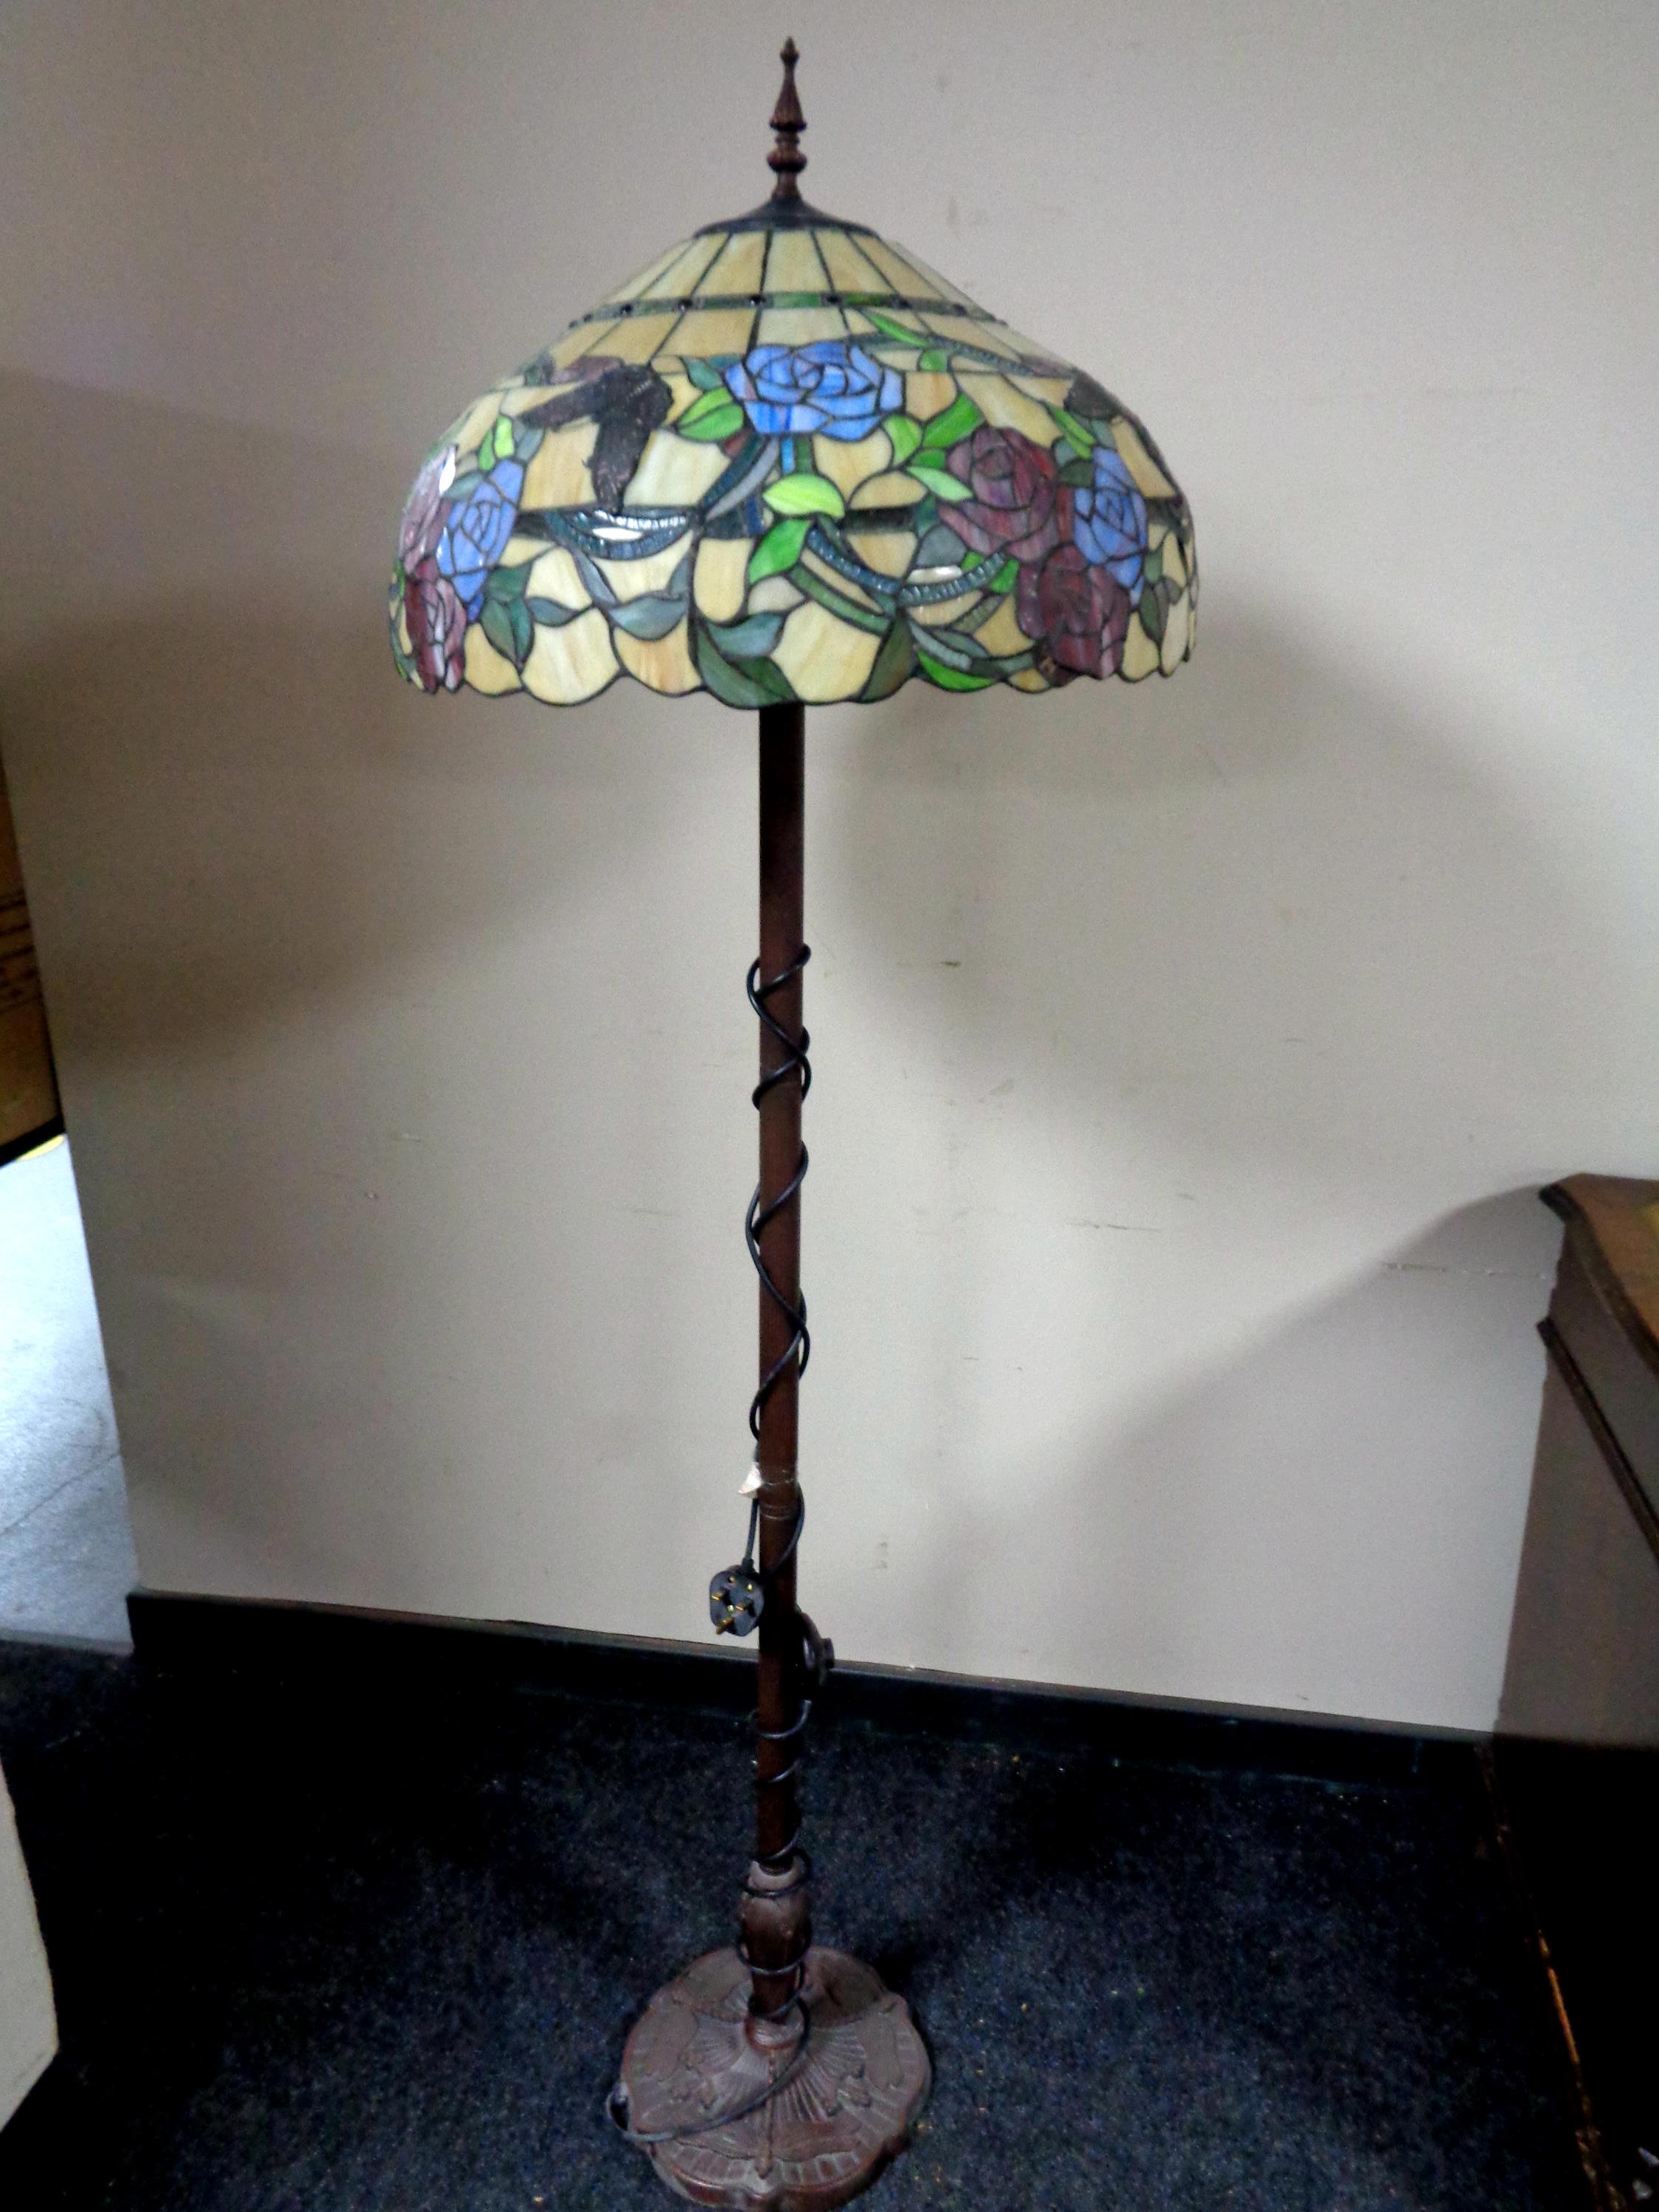 A Tiffany style standard lamp with leaded glass shade